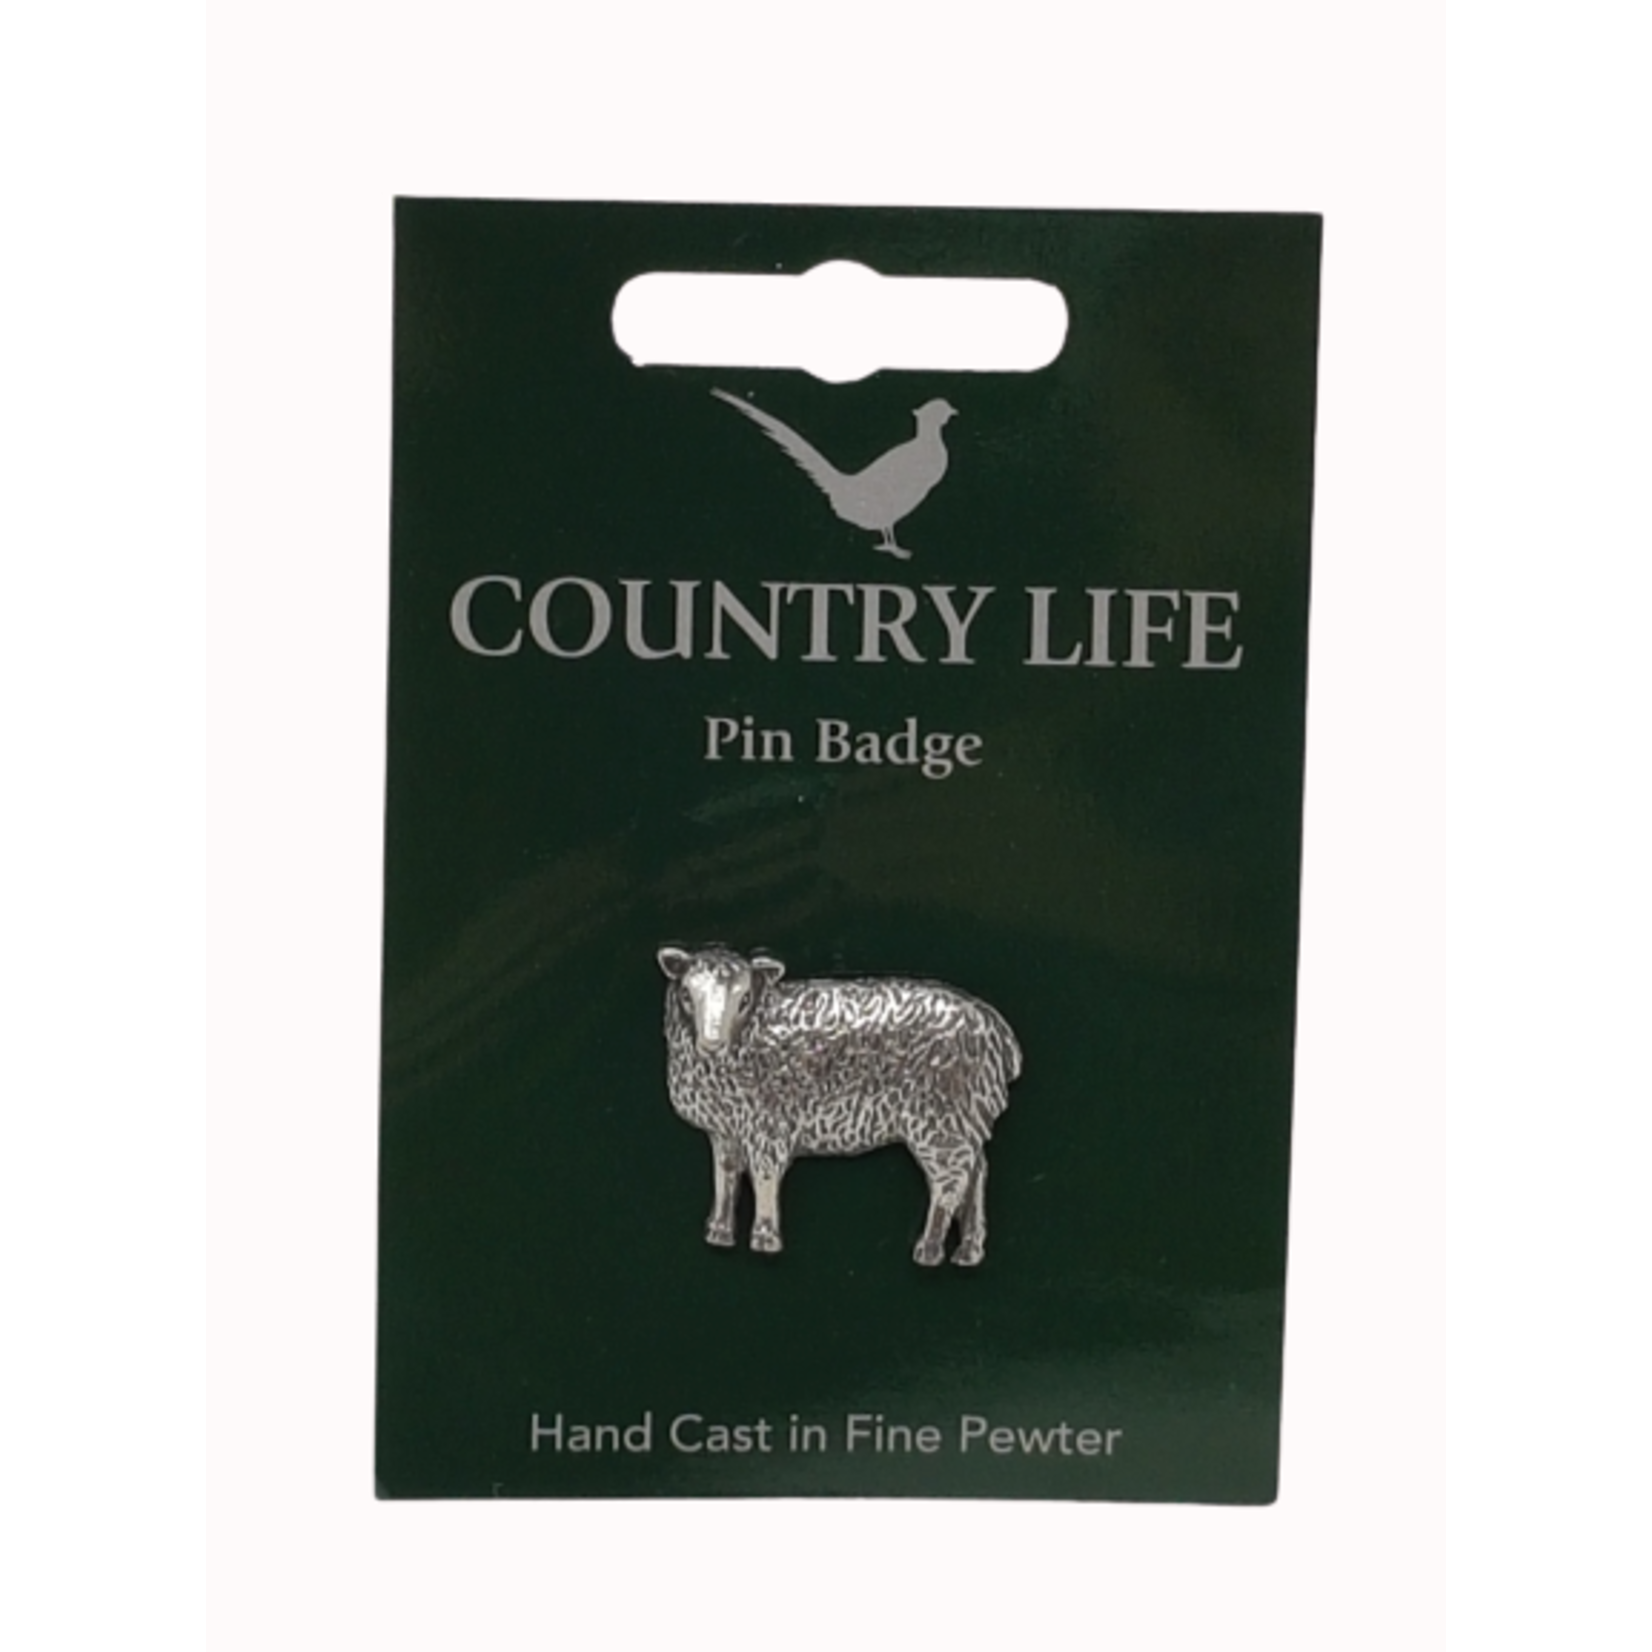 Agriculture and Food Sheep Pin badge